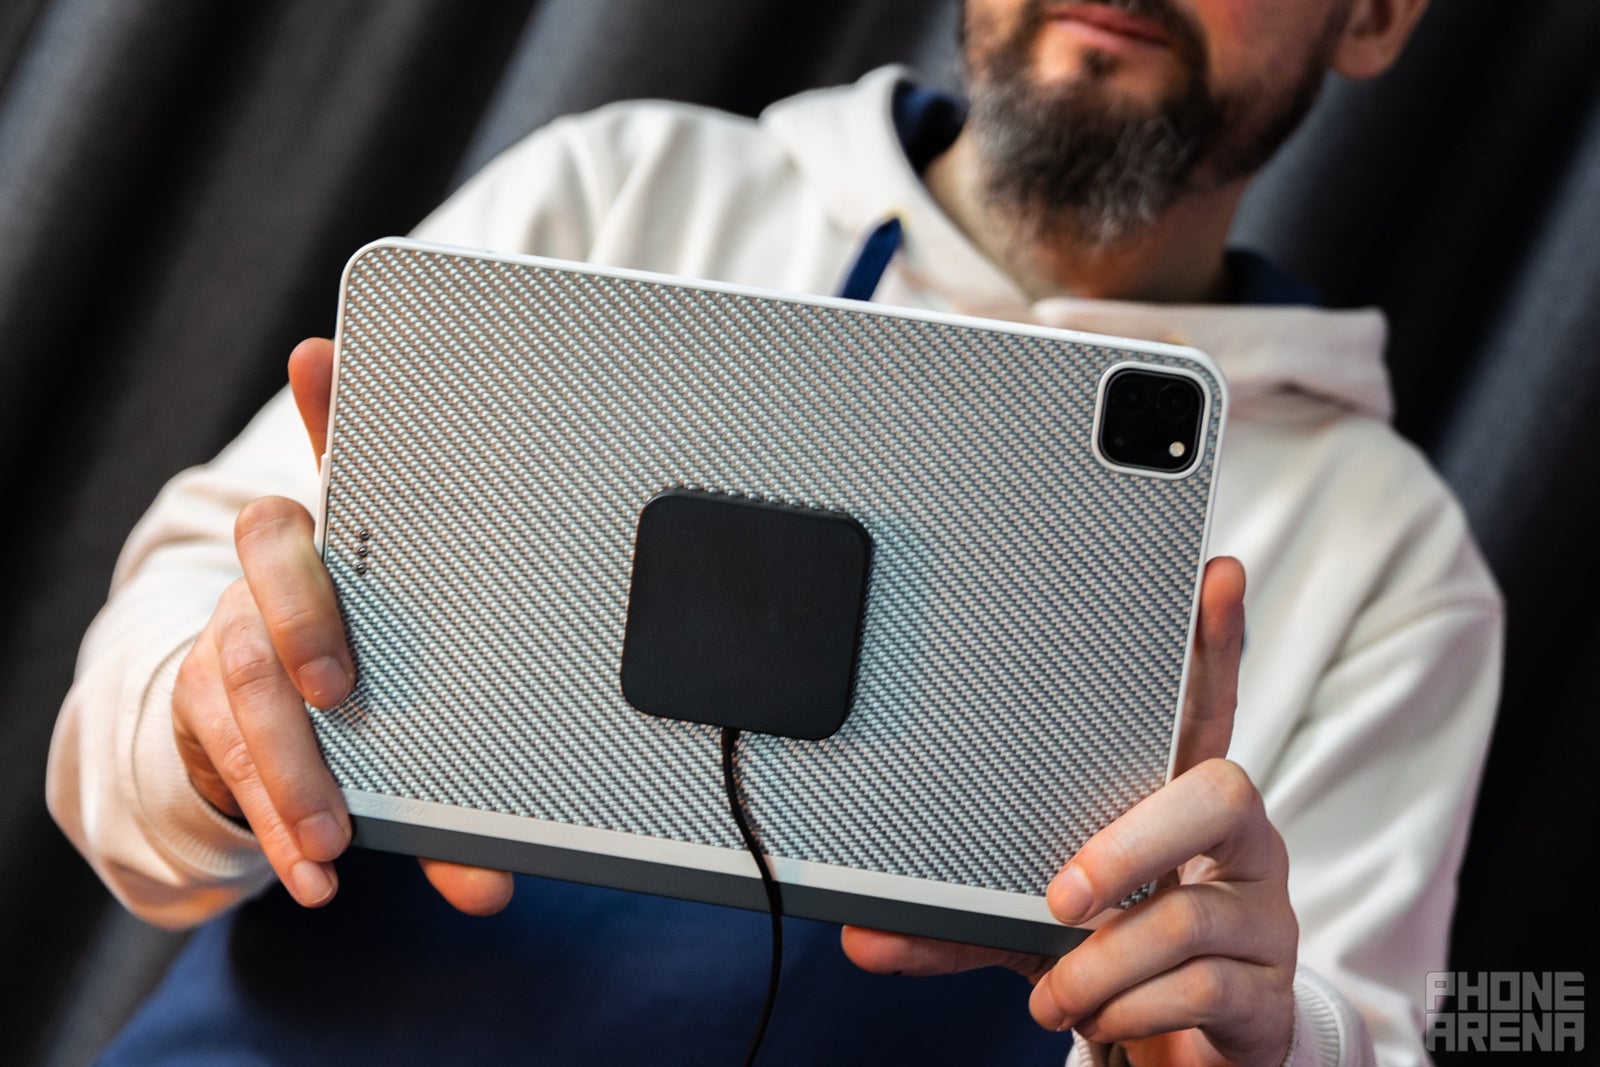 iPad with Wireless Charging: Is It Coming? Do We Need It?, by PITAKA